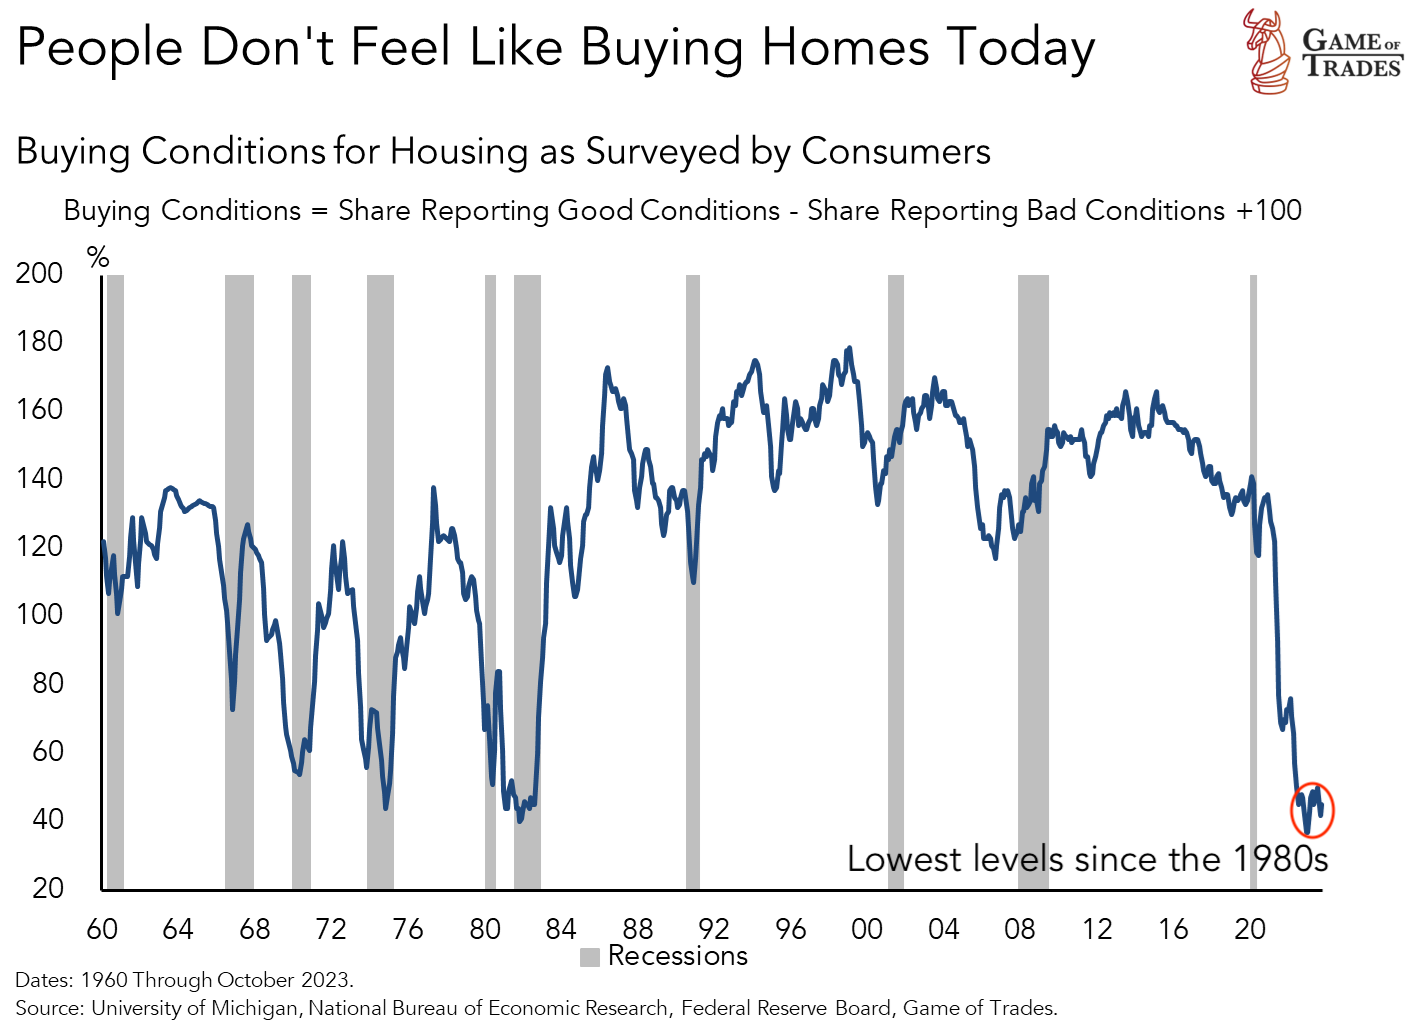 Buying conditions for housing